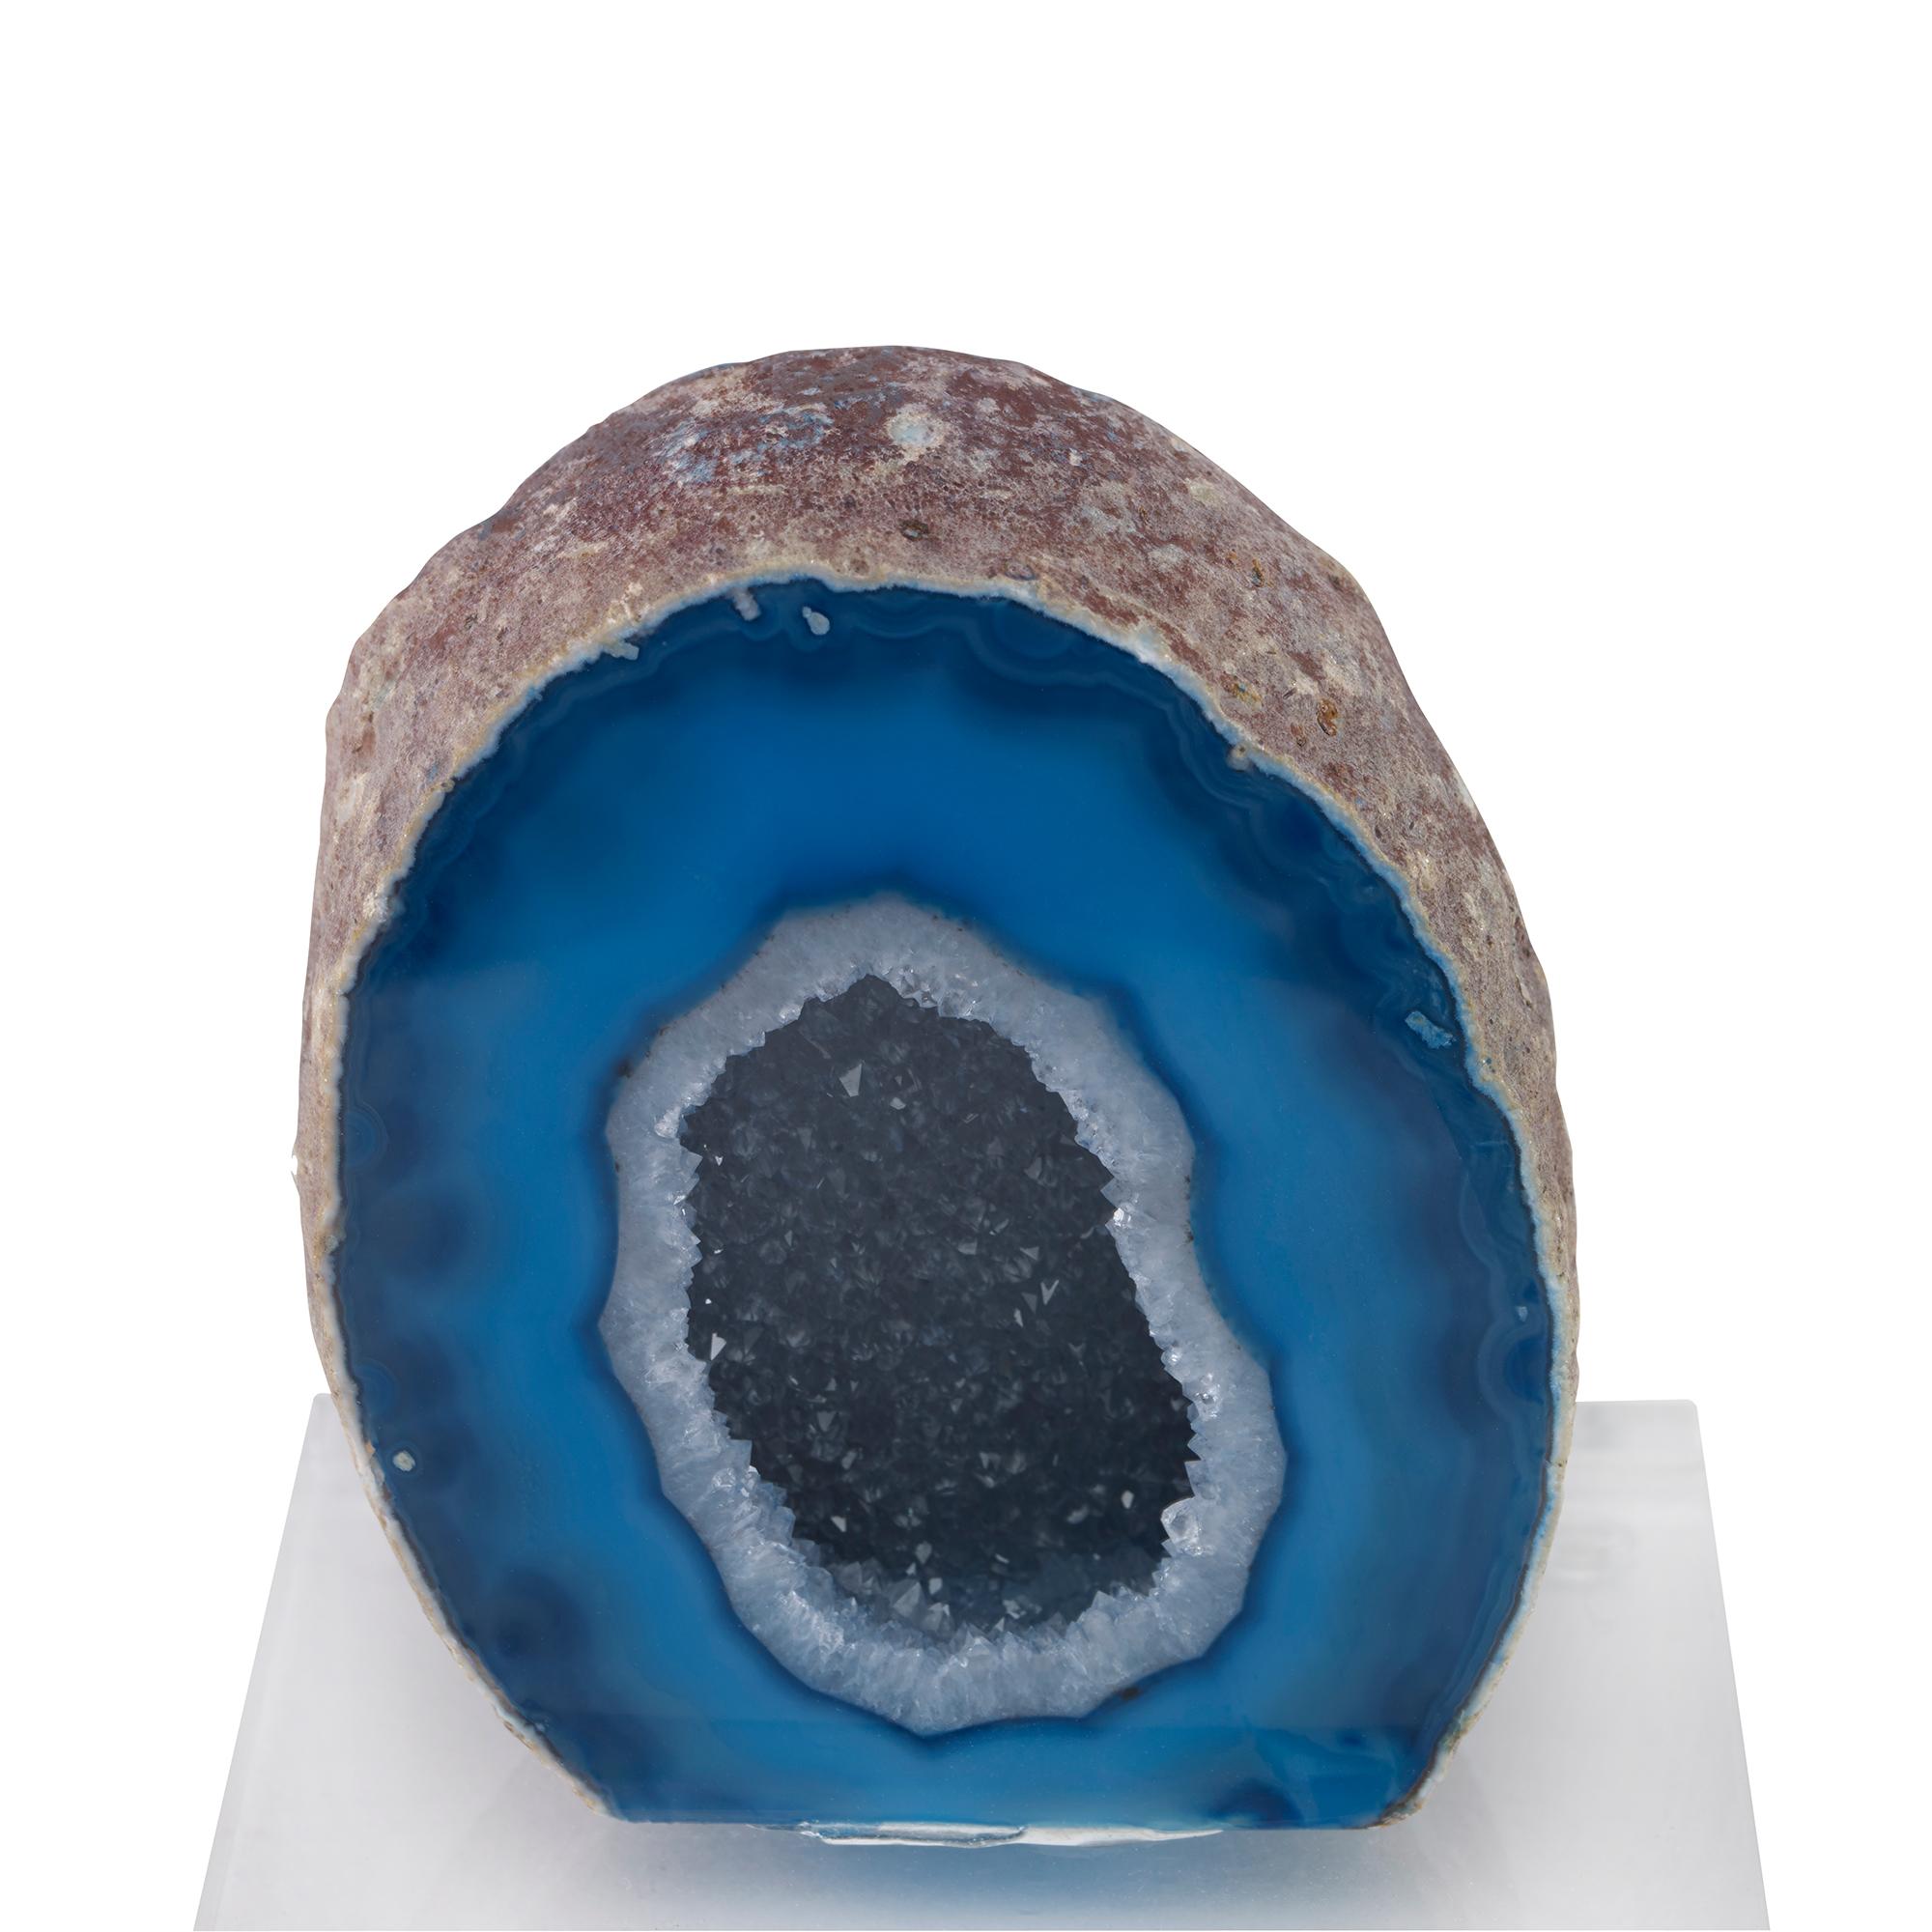 A blue agate geode mounted on a clear acrylic base. Due to the natural material, variation in size, shape, and color is to be expected.